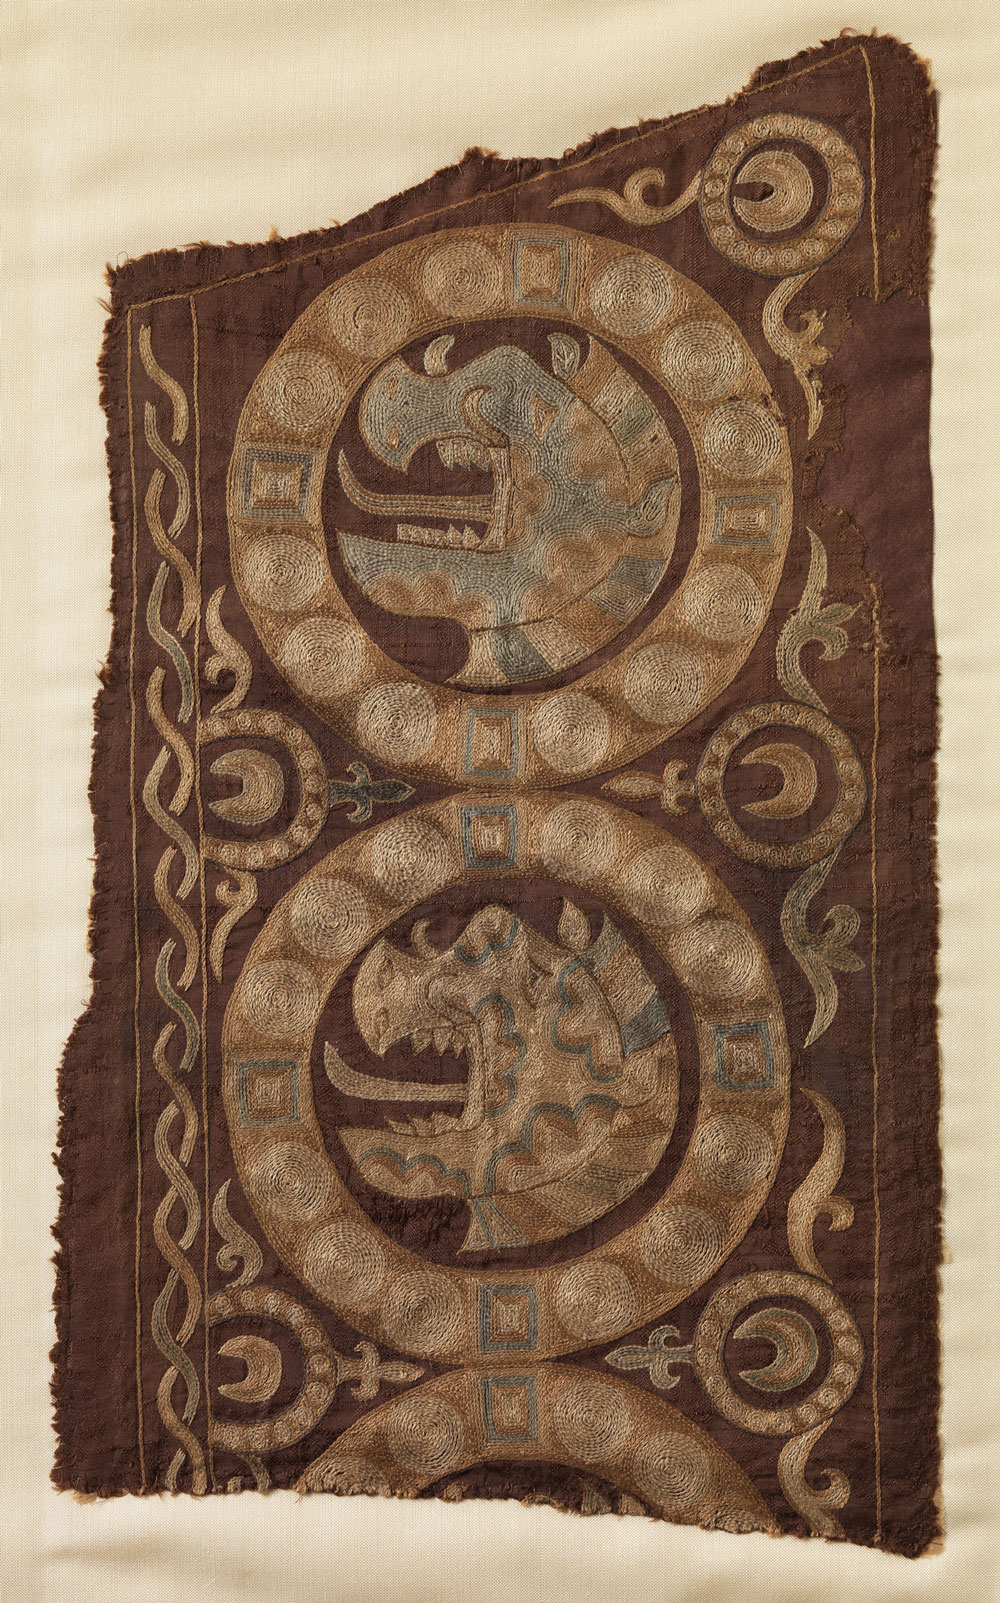 Maker Unknown, Sogdian People, Textile Fragment, Tang dynasty (618-907 CE), Embroidered compound weave silk, Cotsen Textile Traces Study Collection